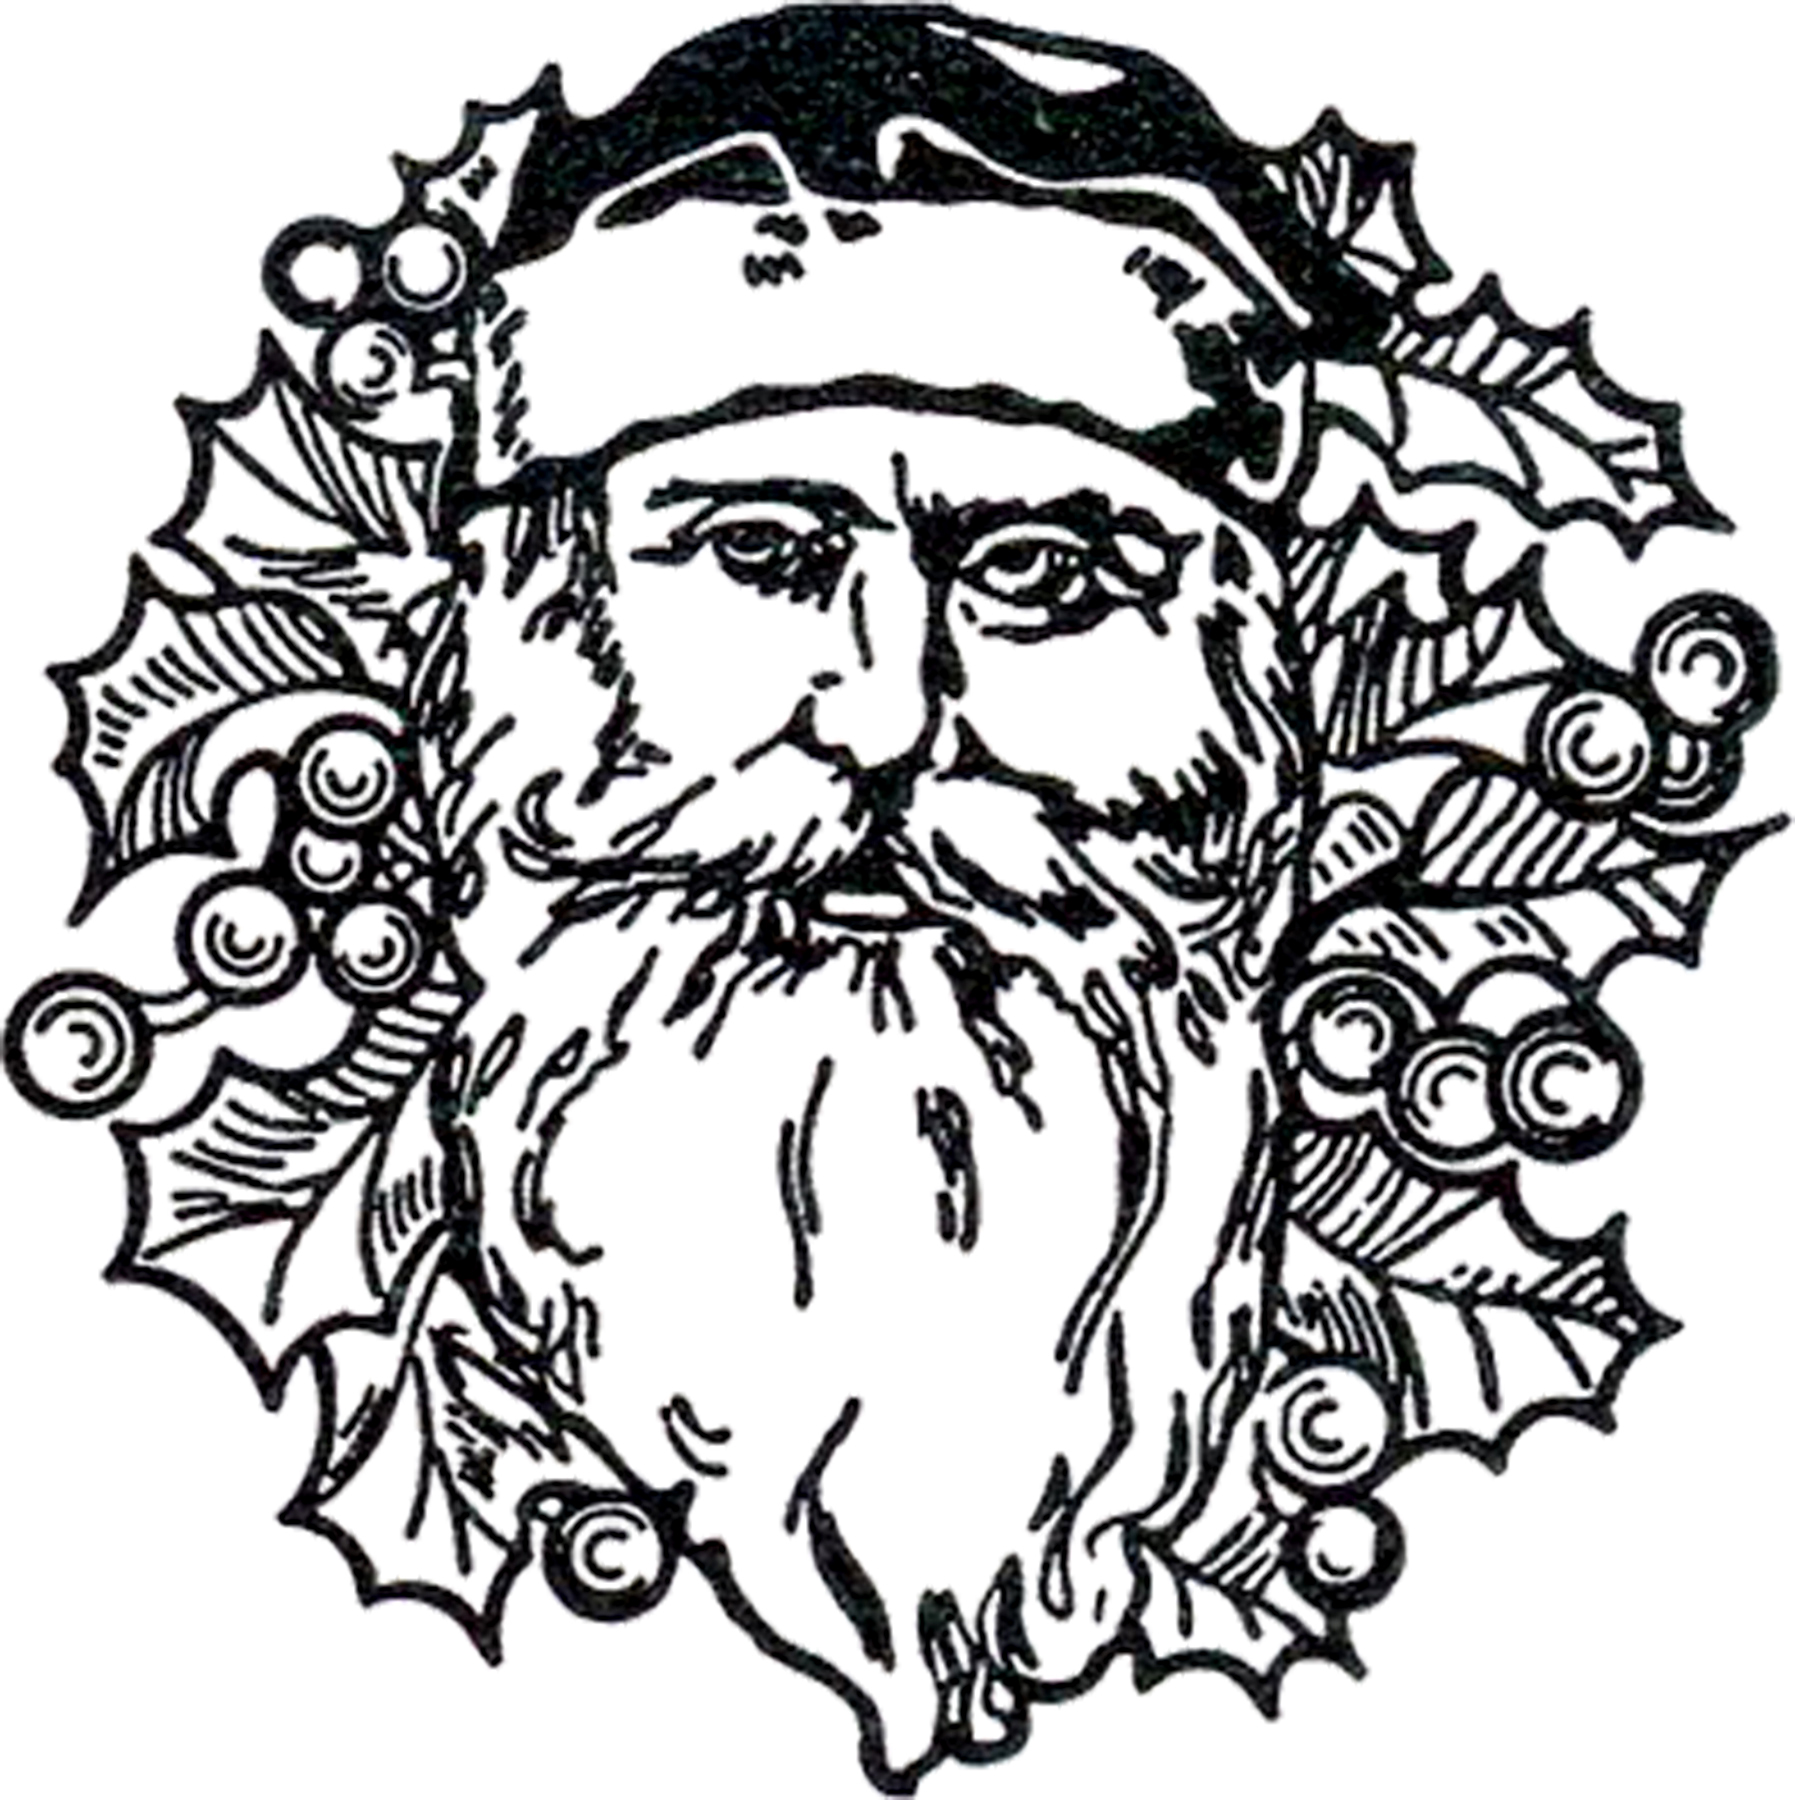 Free Old World Santa Pictures, Download Free Clip Art, Free.